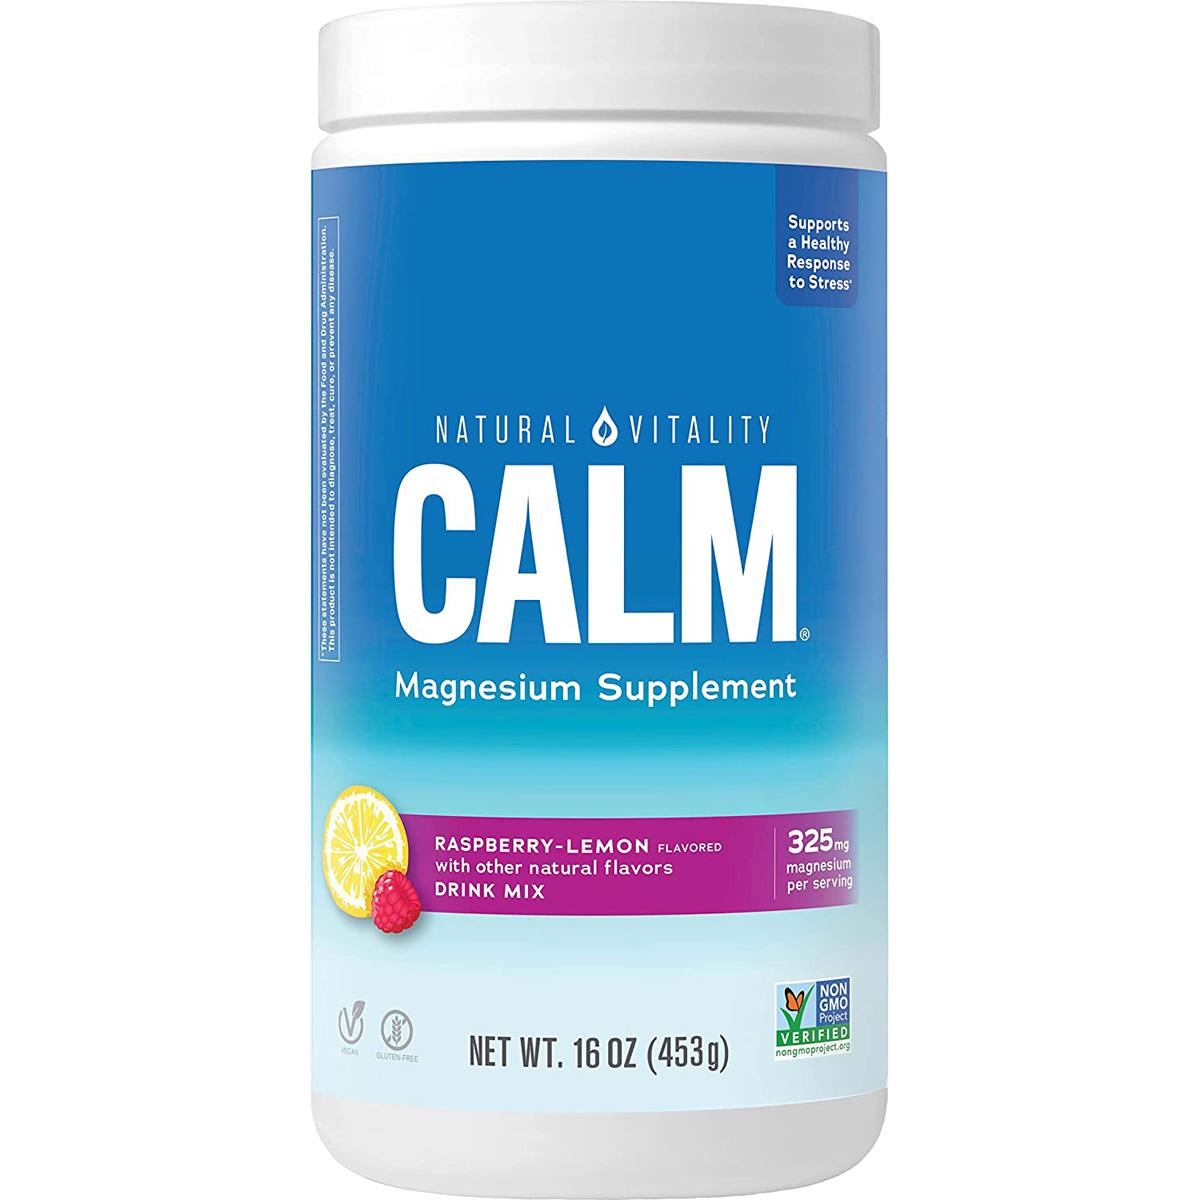 Natural Vitality Calm Dietary Magnesium Citrate Supplement Powder for $13.29 Shipped